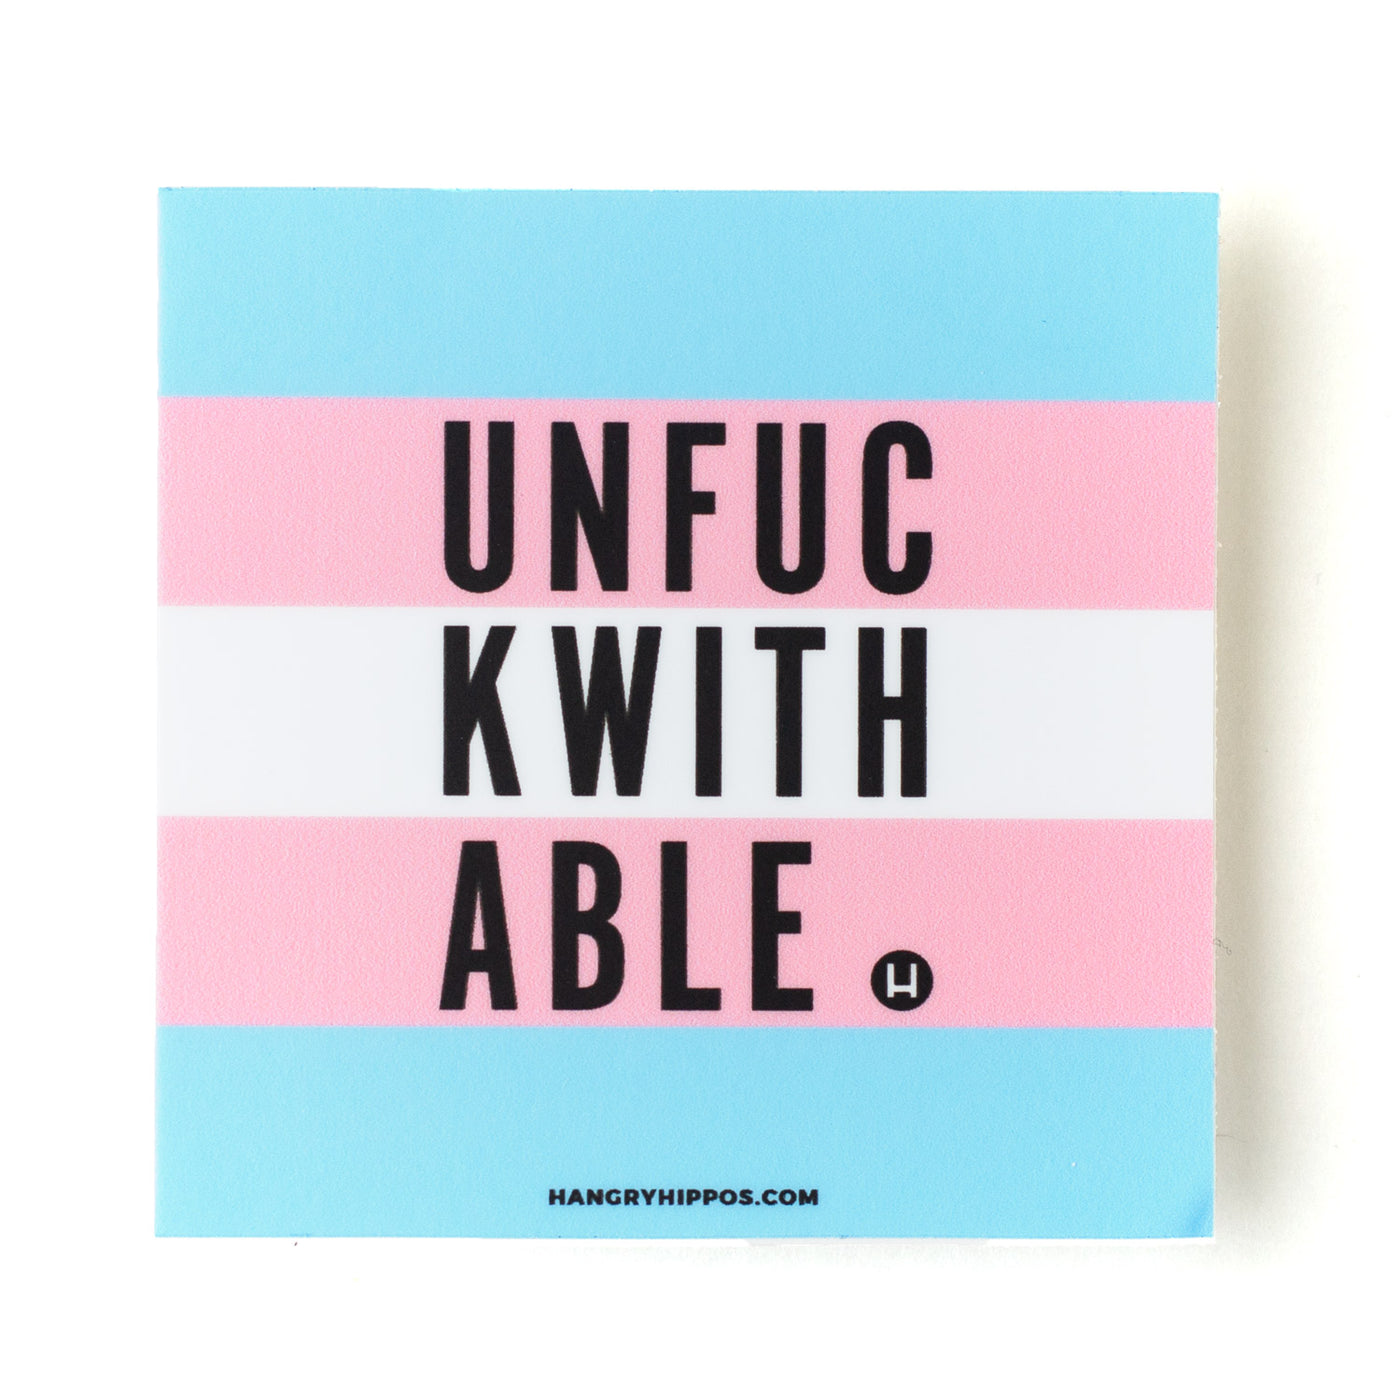 Unf*ckwithable Sticker